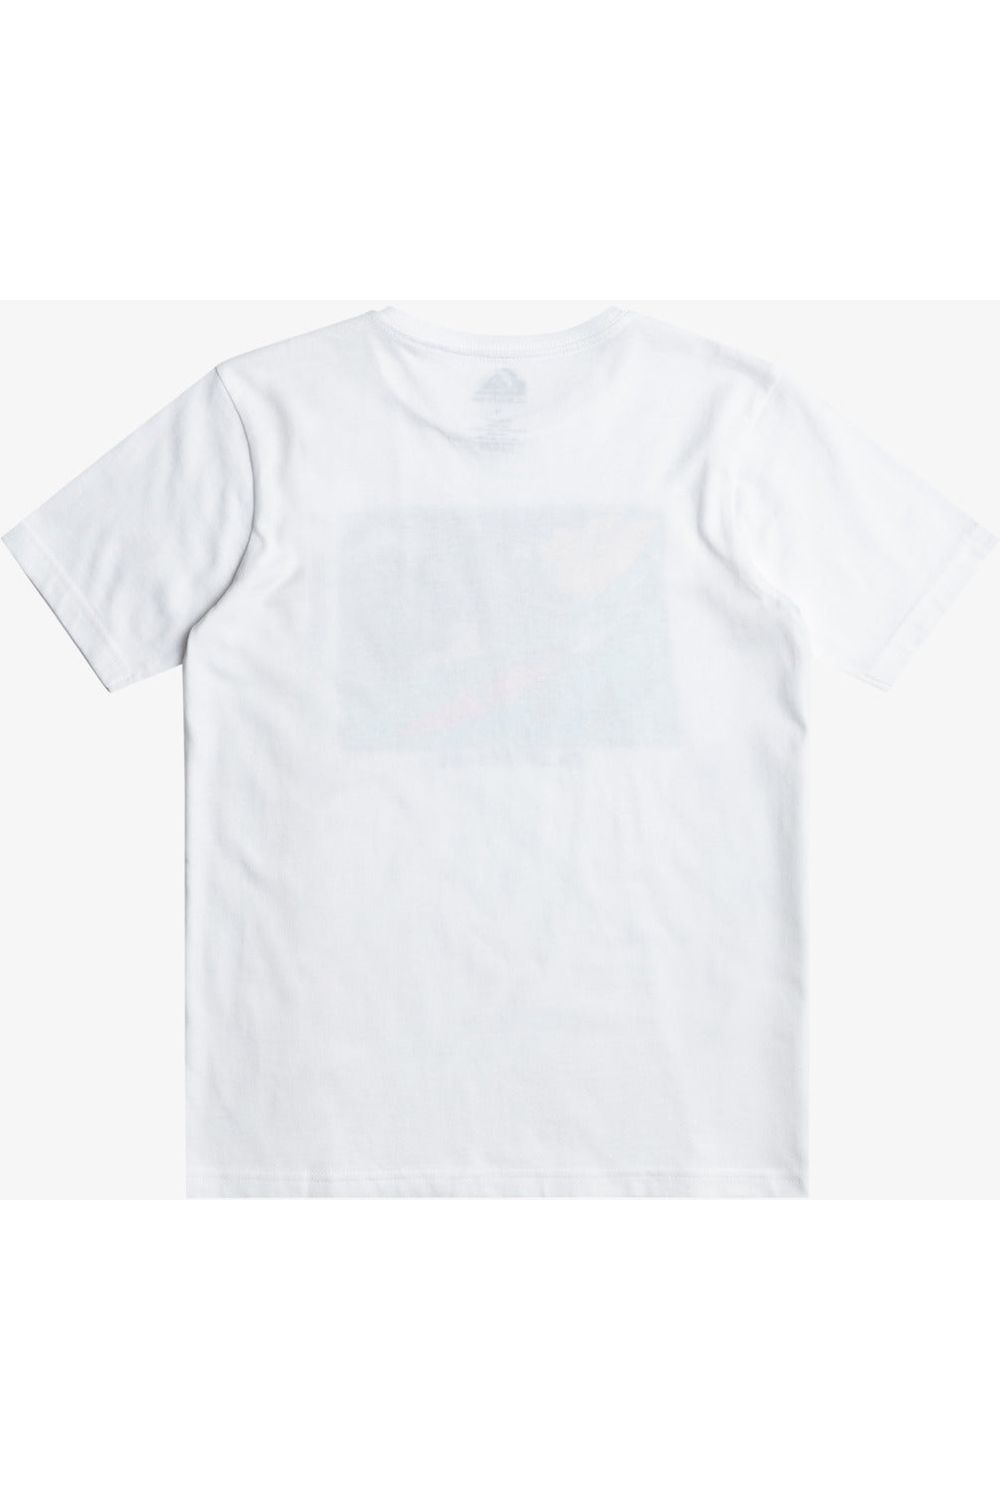 Quiksilver Night Session Shorth Sleeve Youth T-Shirt White